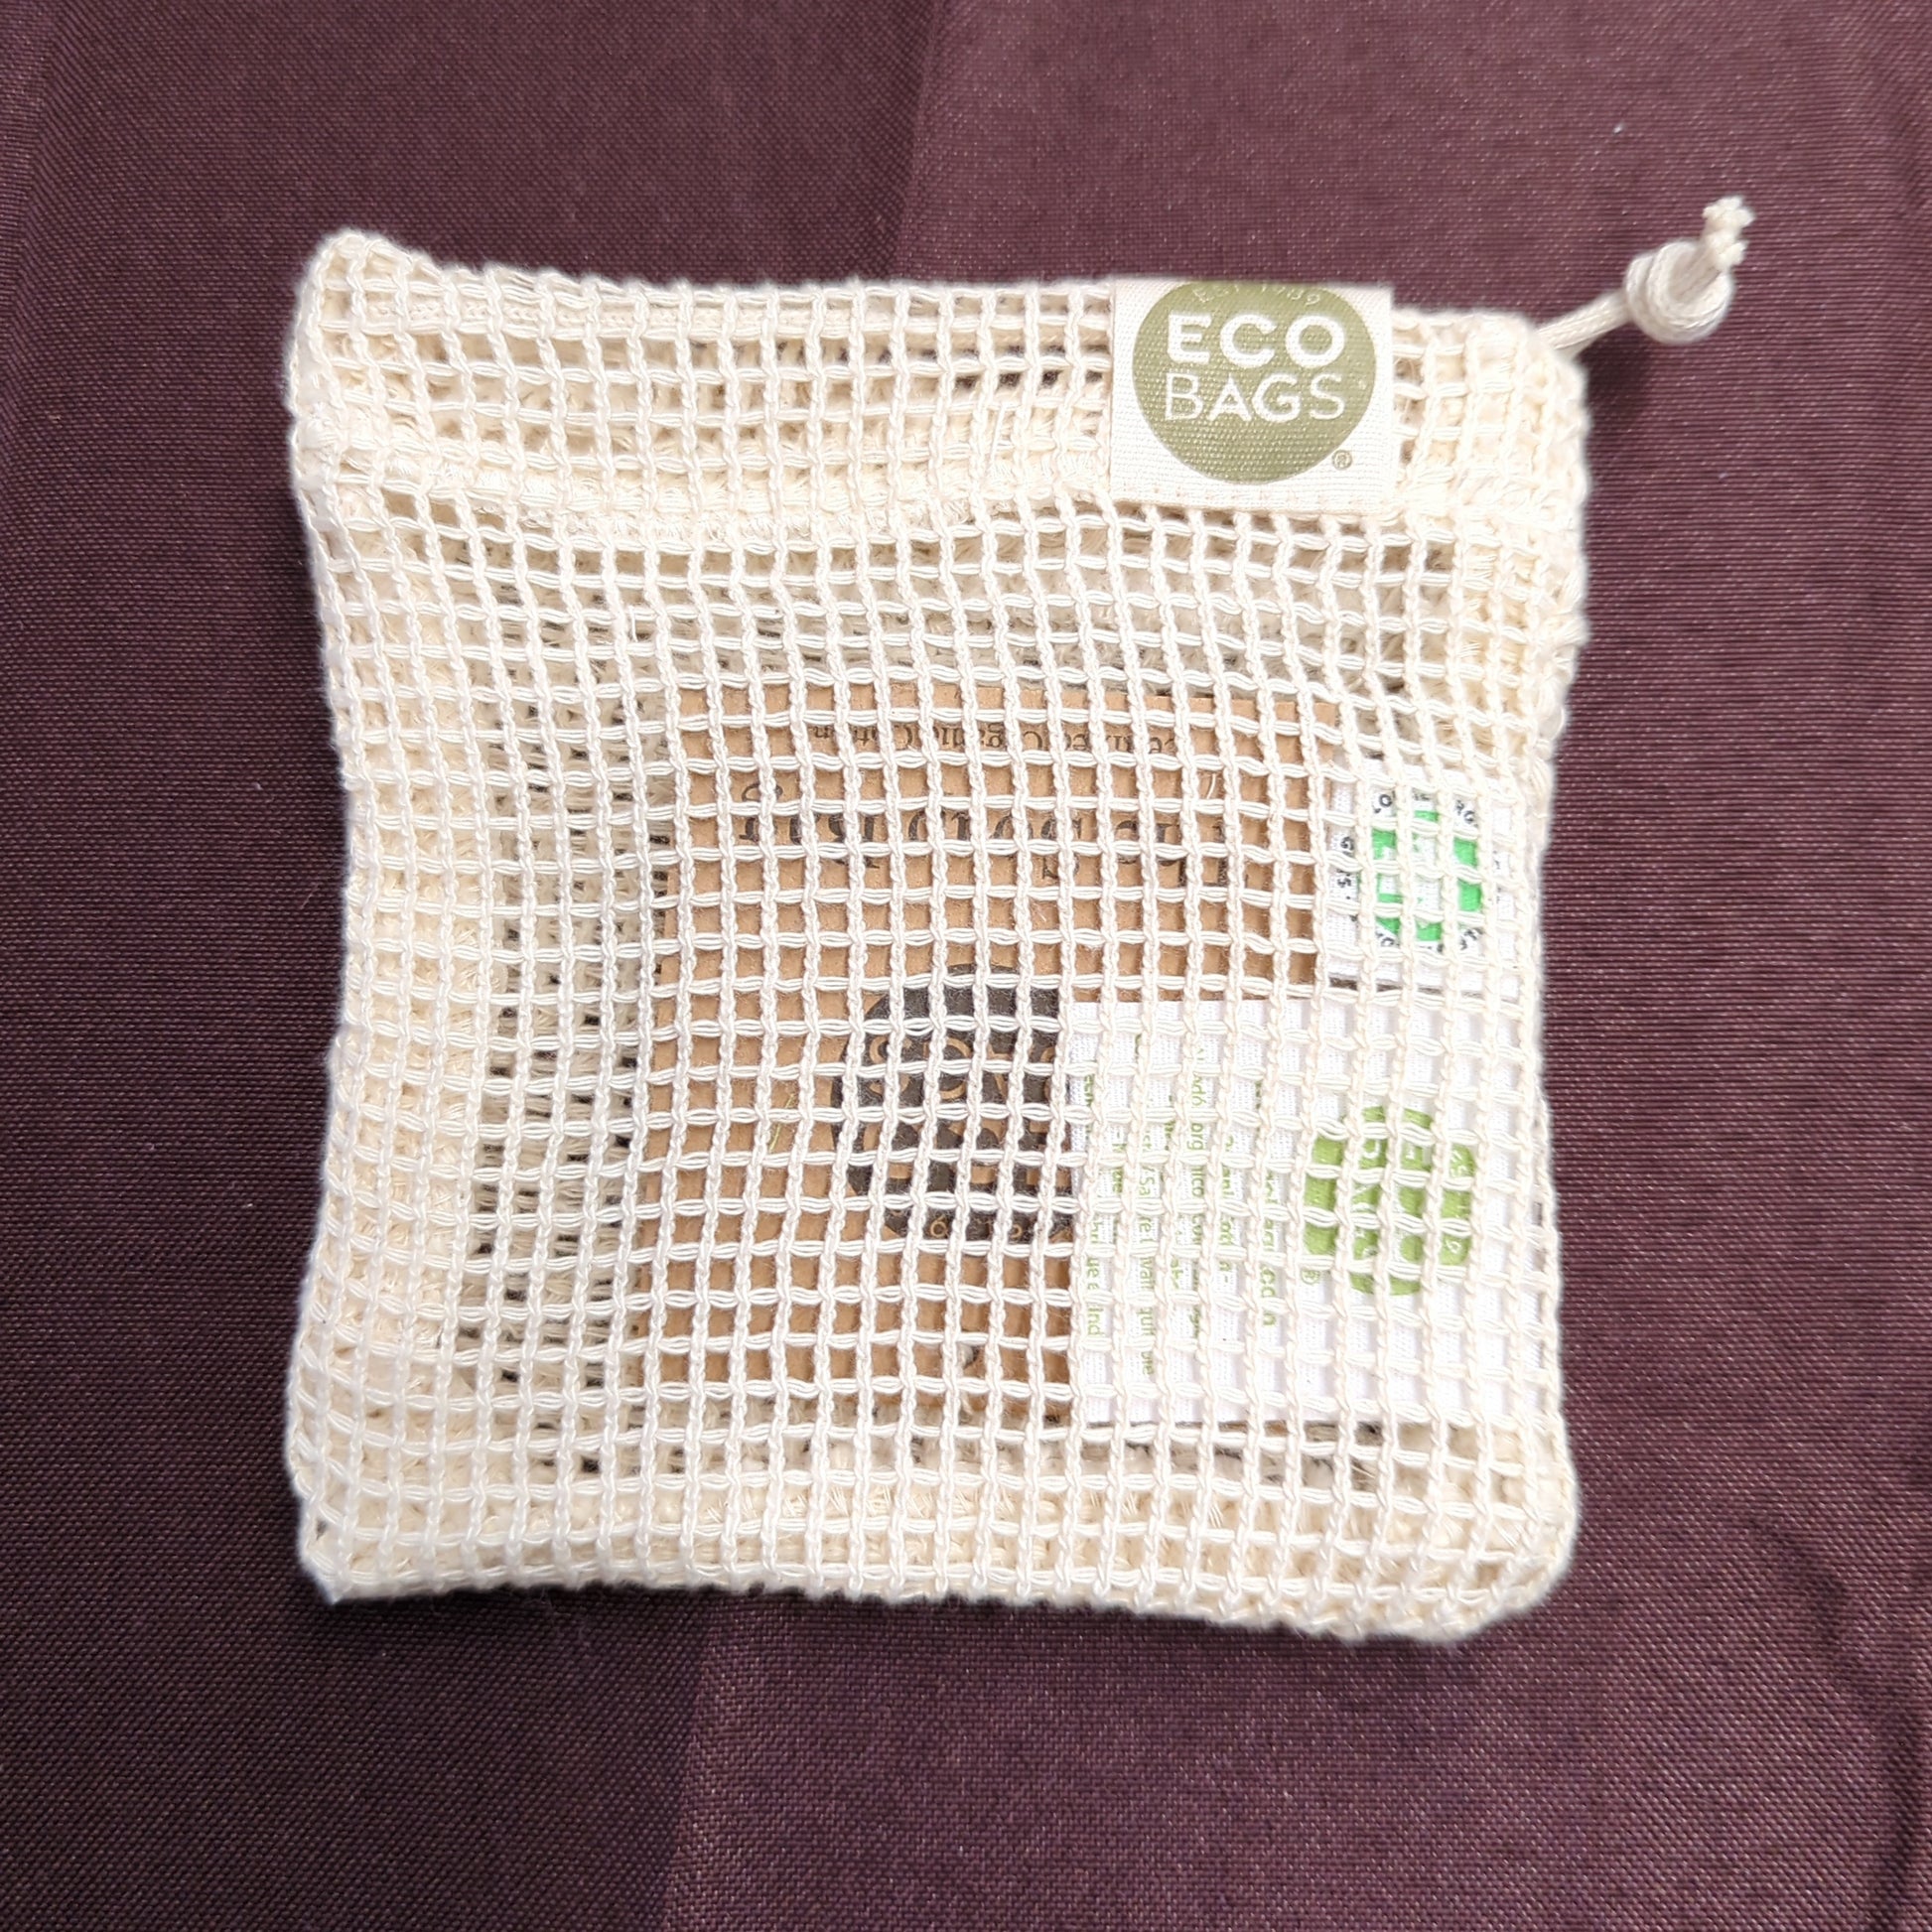 Soap Bag from Eco-Bags - Cherry Valley Organics